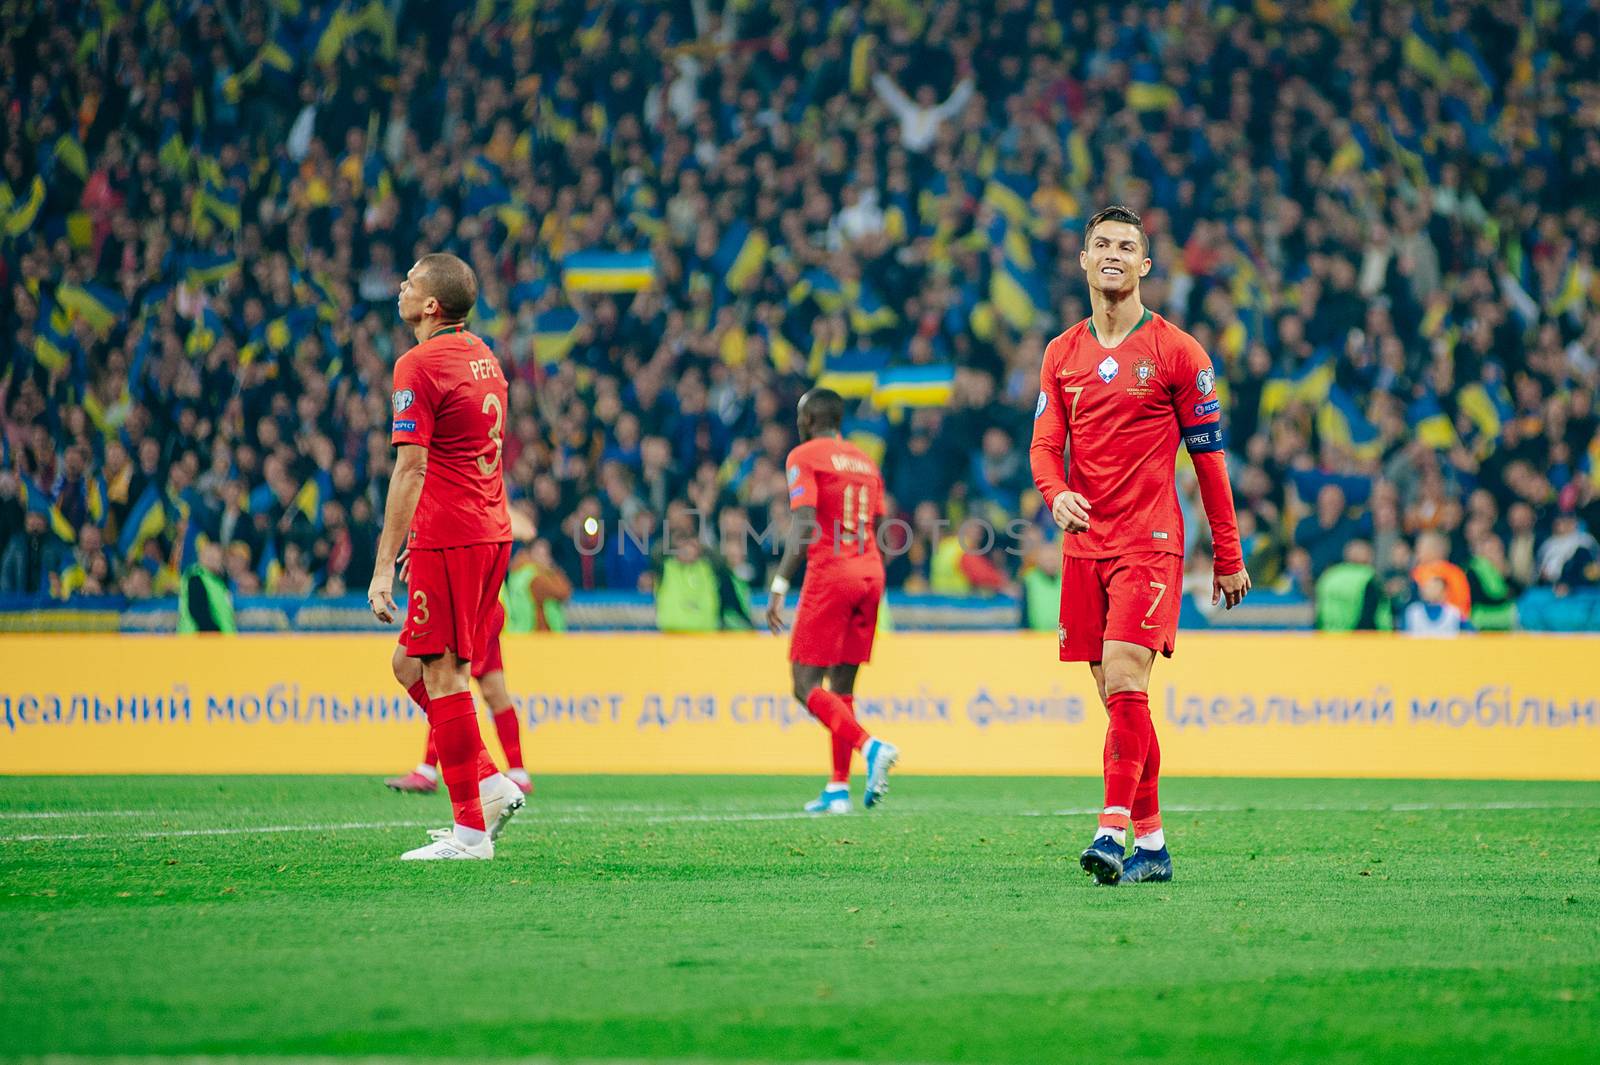 Kyiv, Ukraine - October 14, 2019: Cristiano Ronaldo, captain and forward of Portugal national team during the match of the qualifying EURO 2020 vs Ukraine at the Olympic Stadium